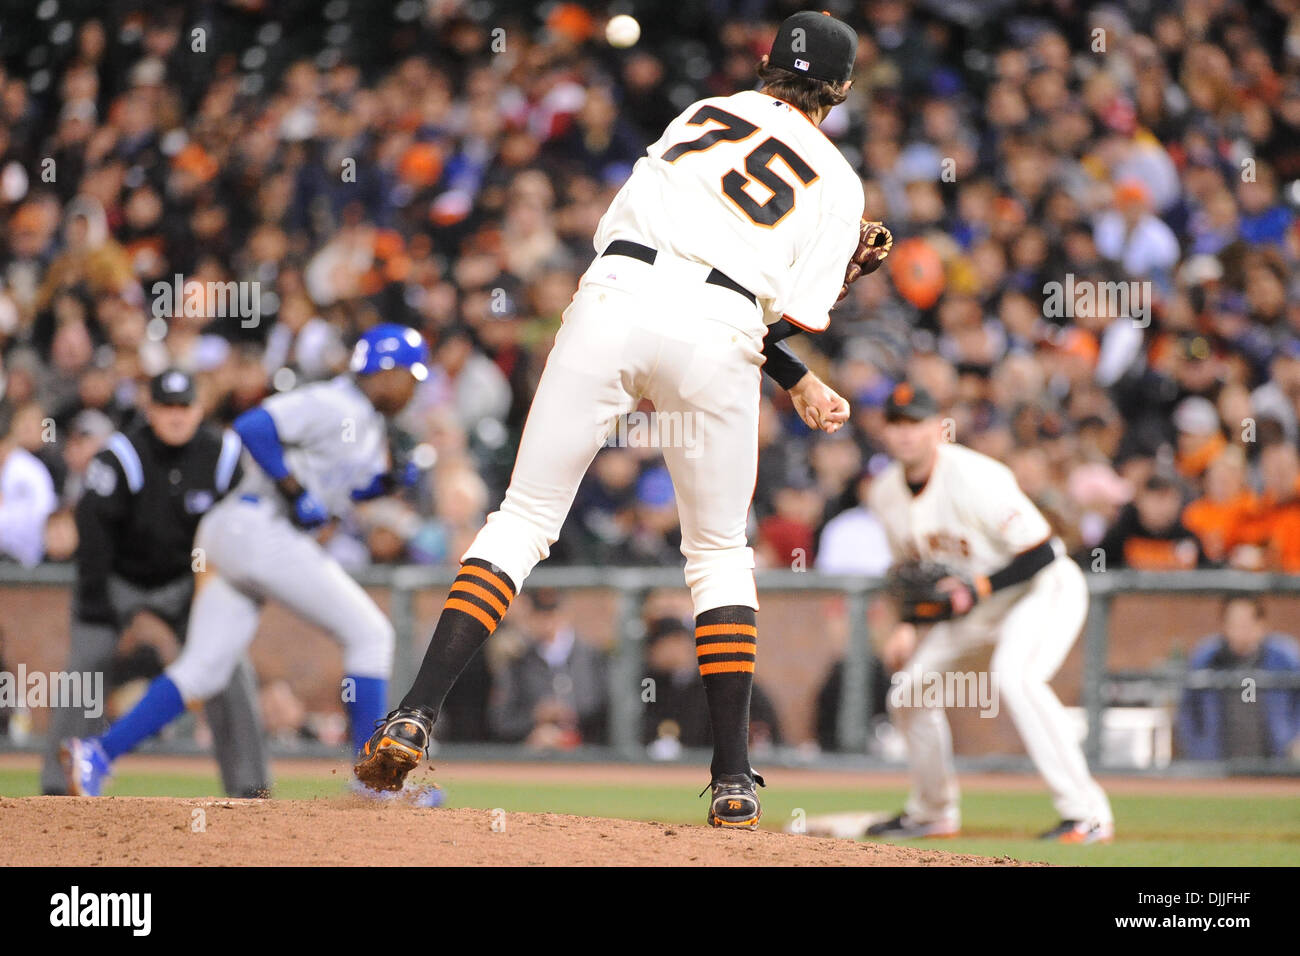 11 August, 2010: San Francisco Giants pitcher BARRY ZITO (#75) throws to first base at AT&T Park in San Francisco, California. The San Francisco Giants defeated the Chicago Cubs 5-4. (Credit Image: © Charles Herskowitz/Southcreek Global/ZUMApress.com) Stock Photo